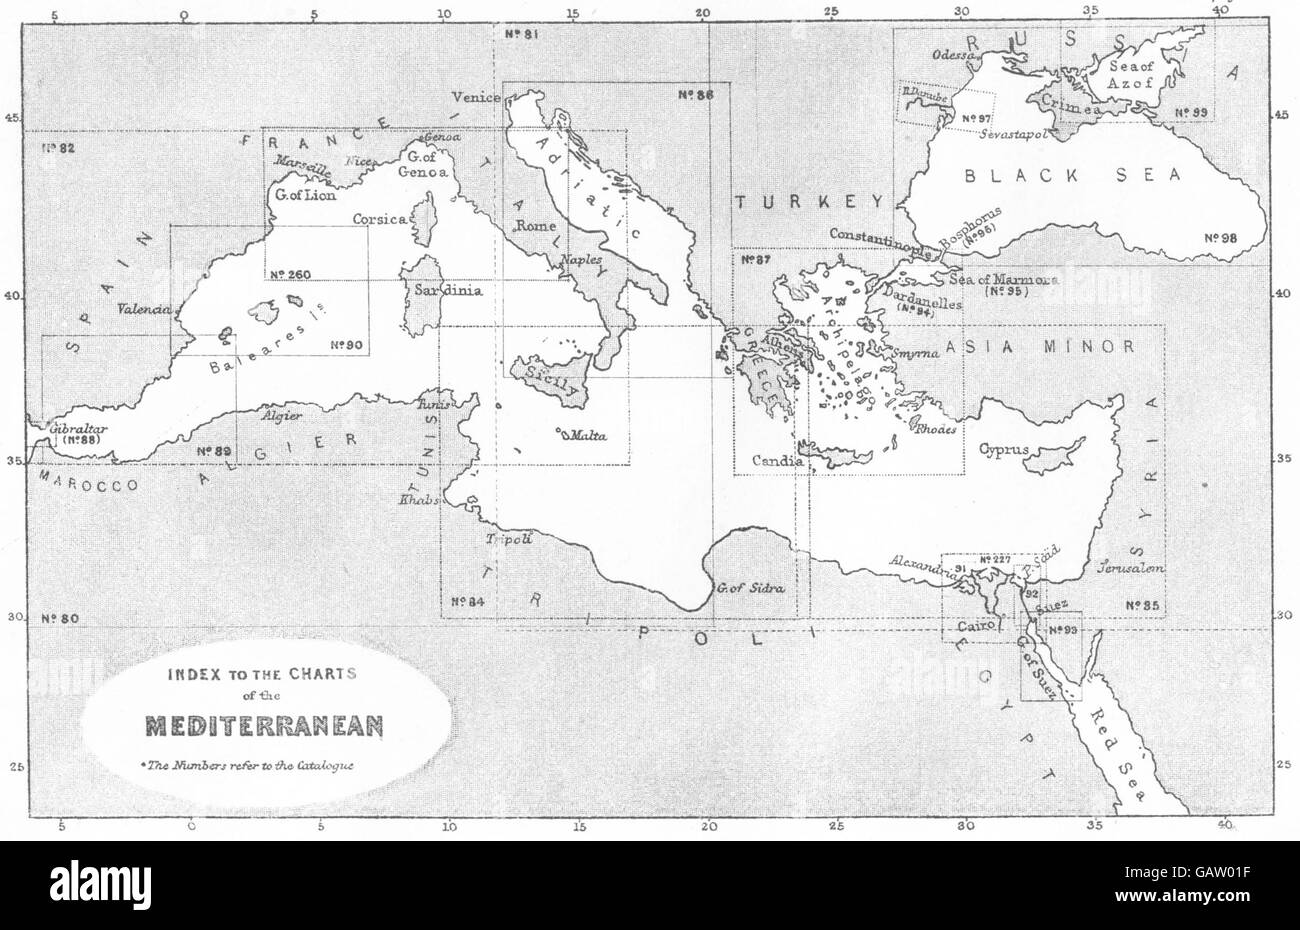 EUROPE: Index to the Charts of the Mediterranean, 1881 antique map Stock Photo